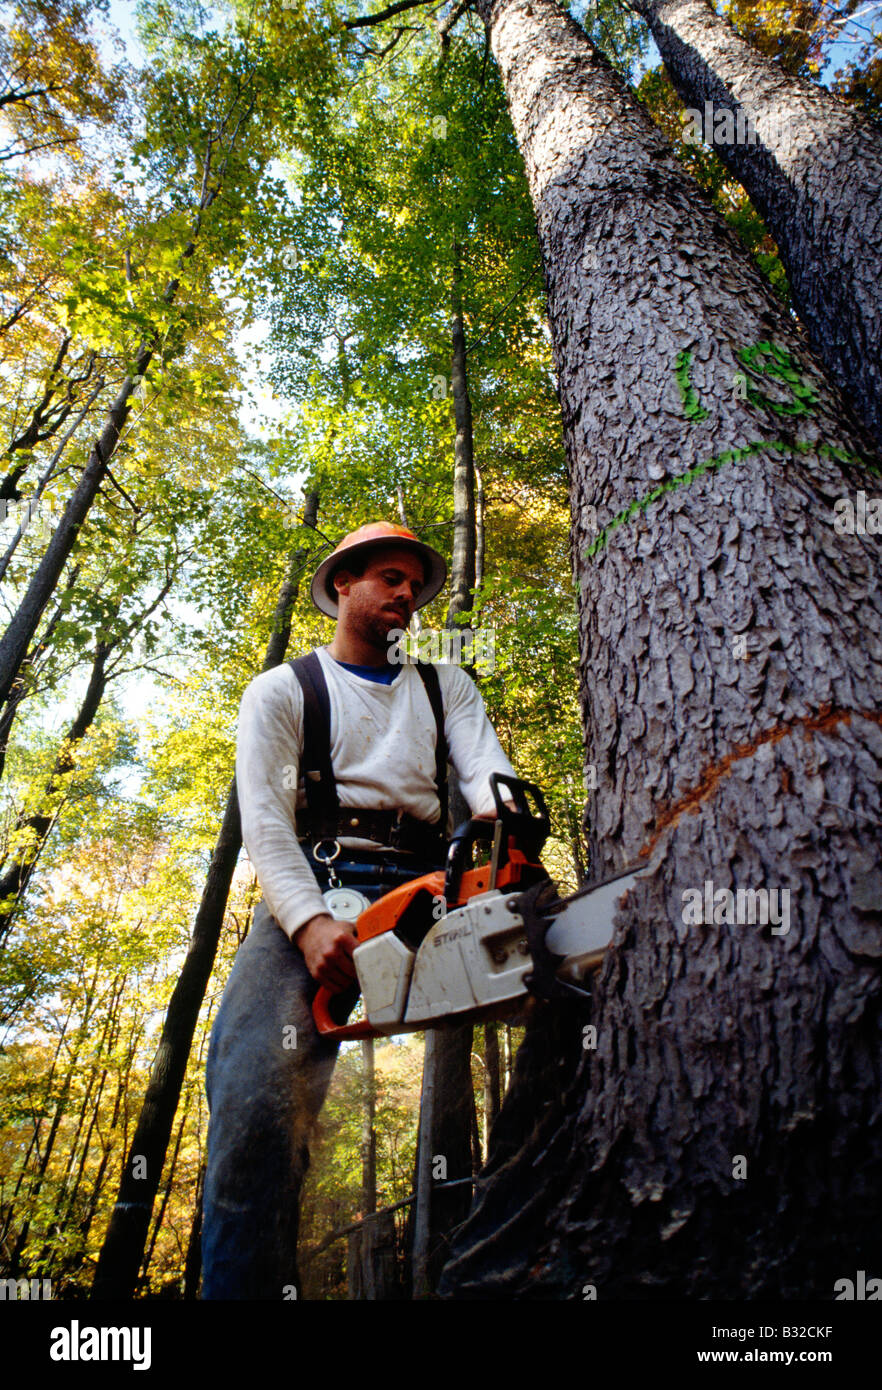 Lumberjack selectively cutting prime hardwood trees with a chainsaw in upstate Pennsylvania forest, USA Stock Photo